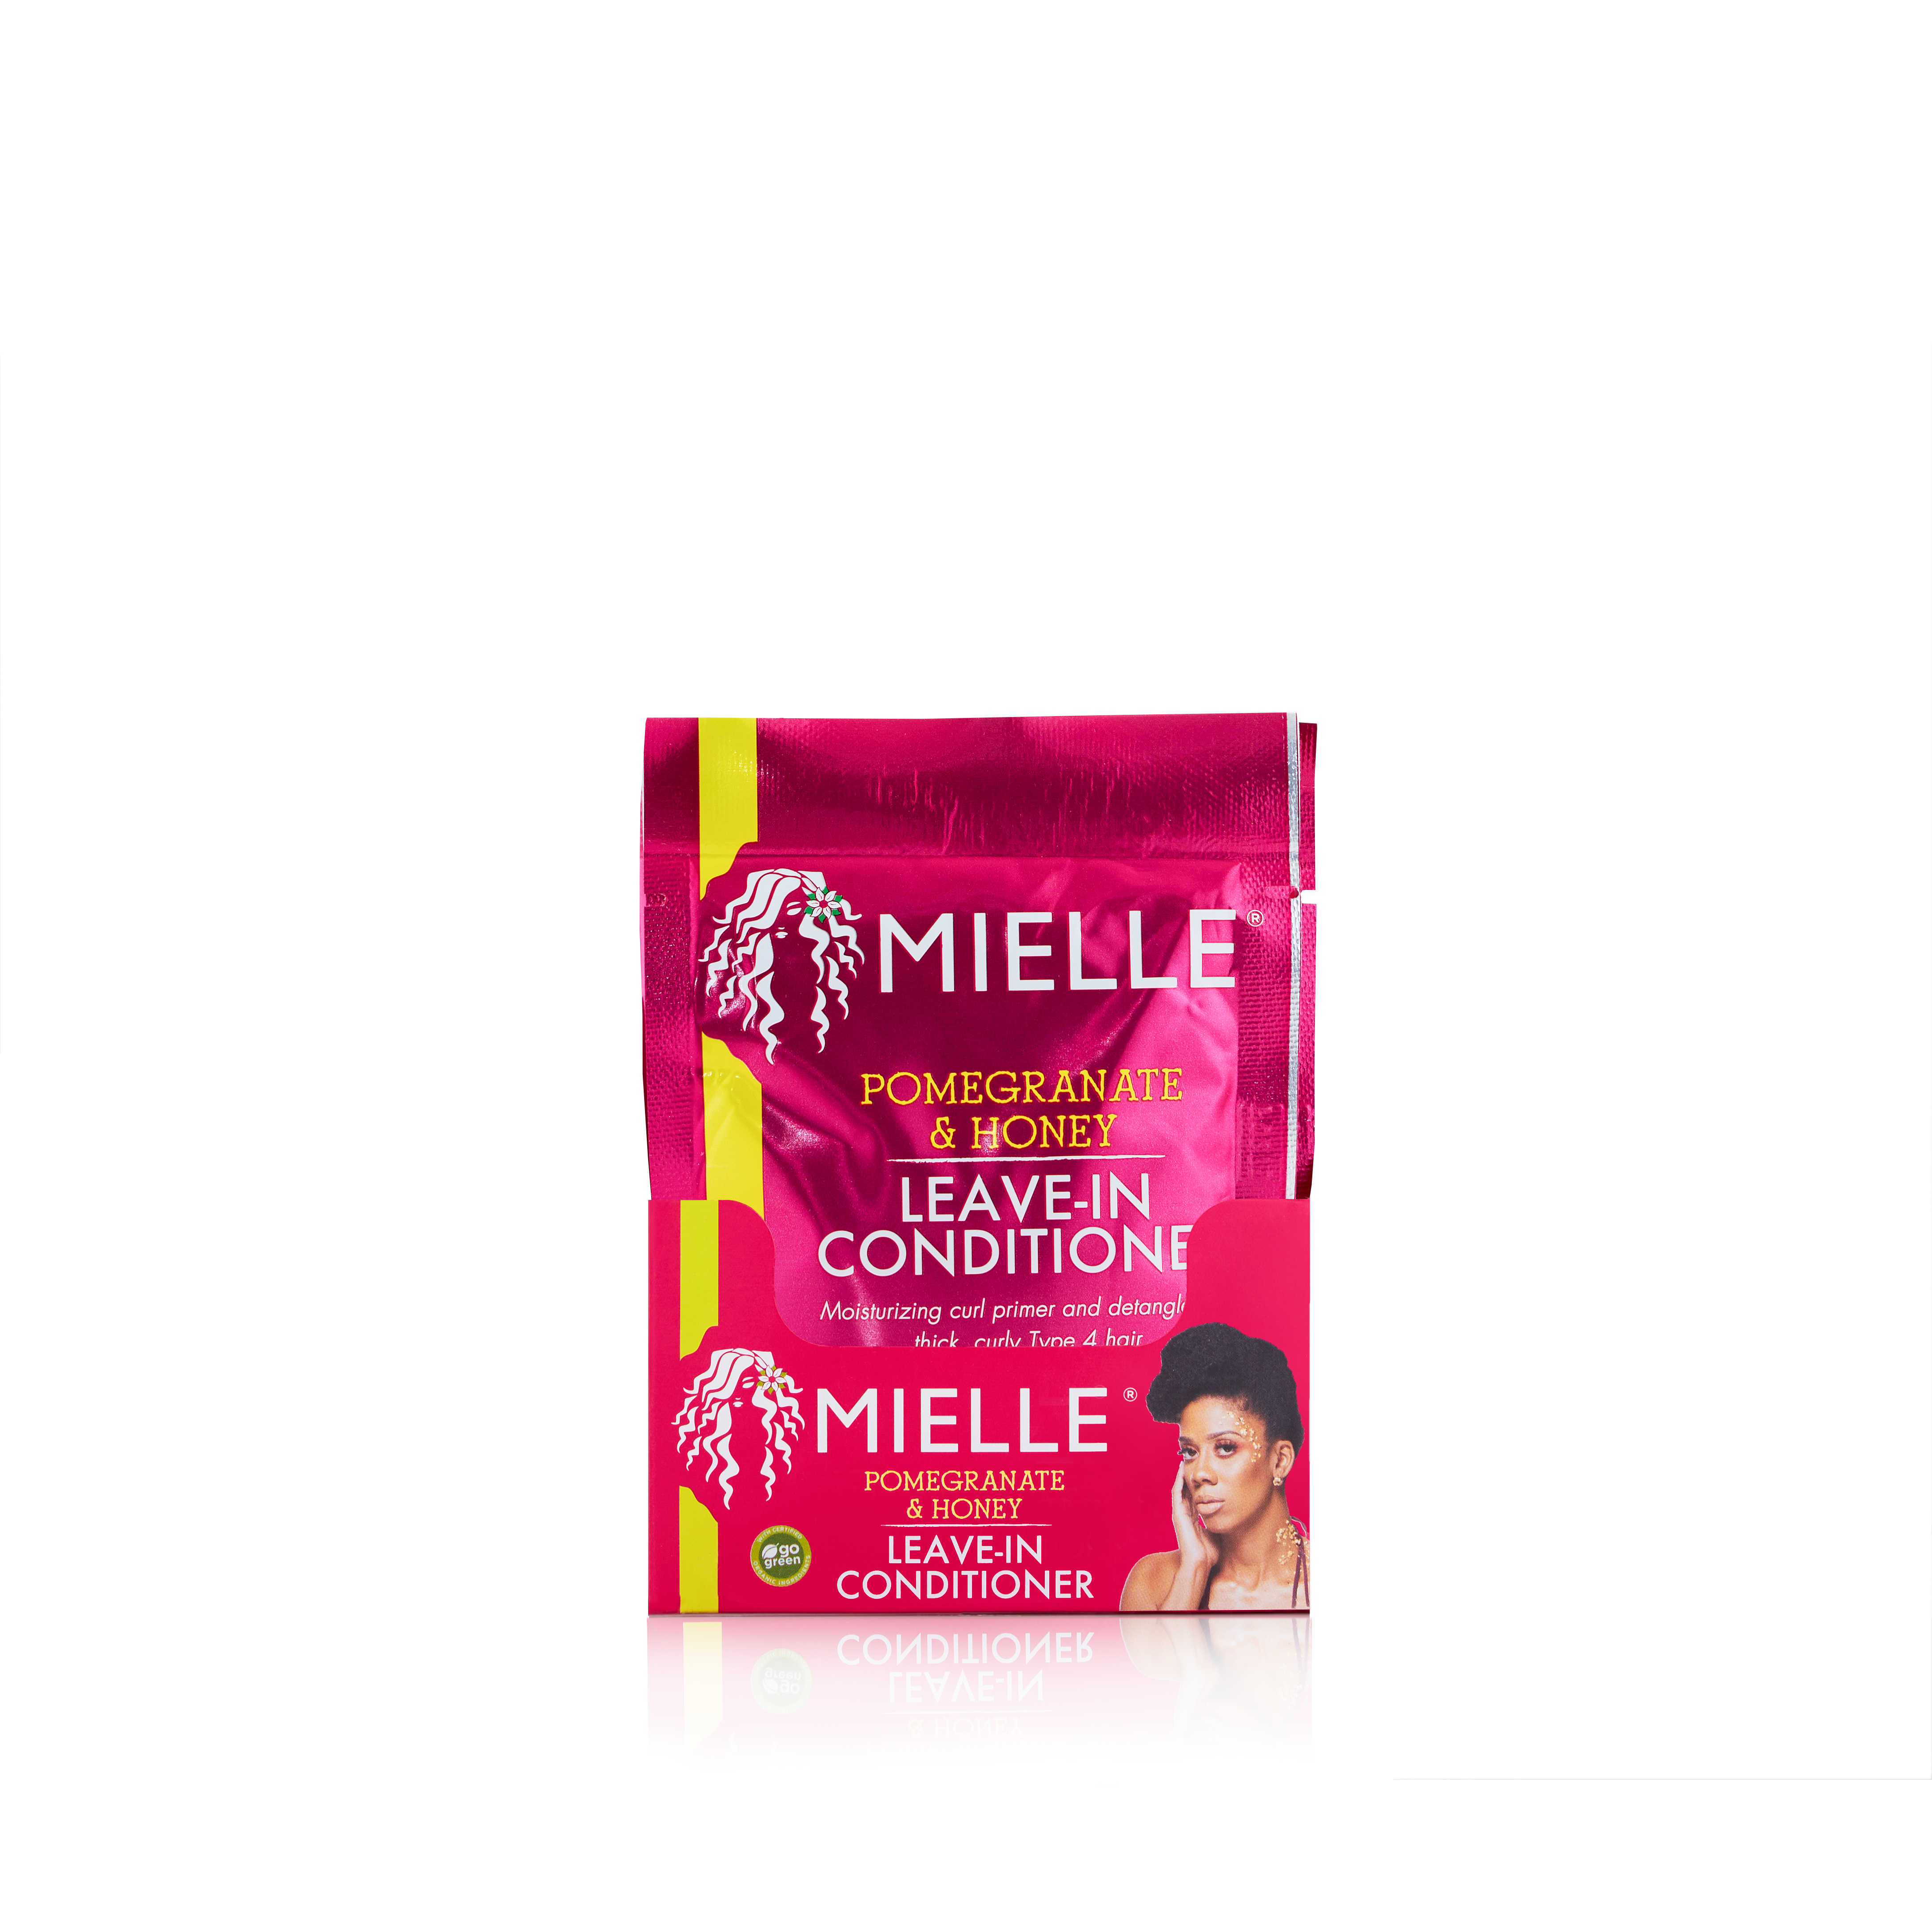 Mielle Organics Leave-in Conditioner, Pomegranate + Honey (pack of 12)